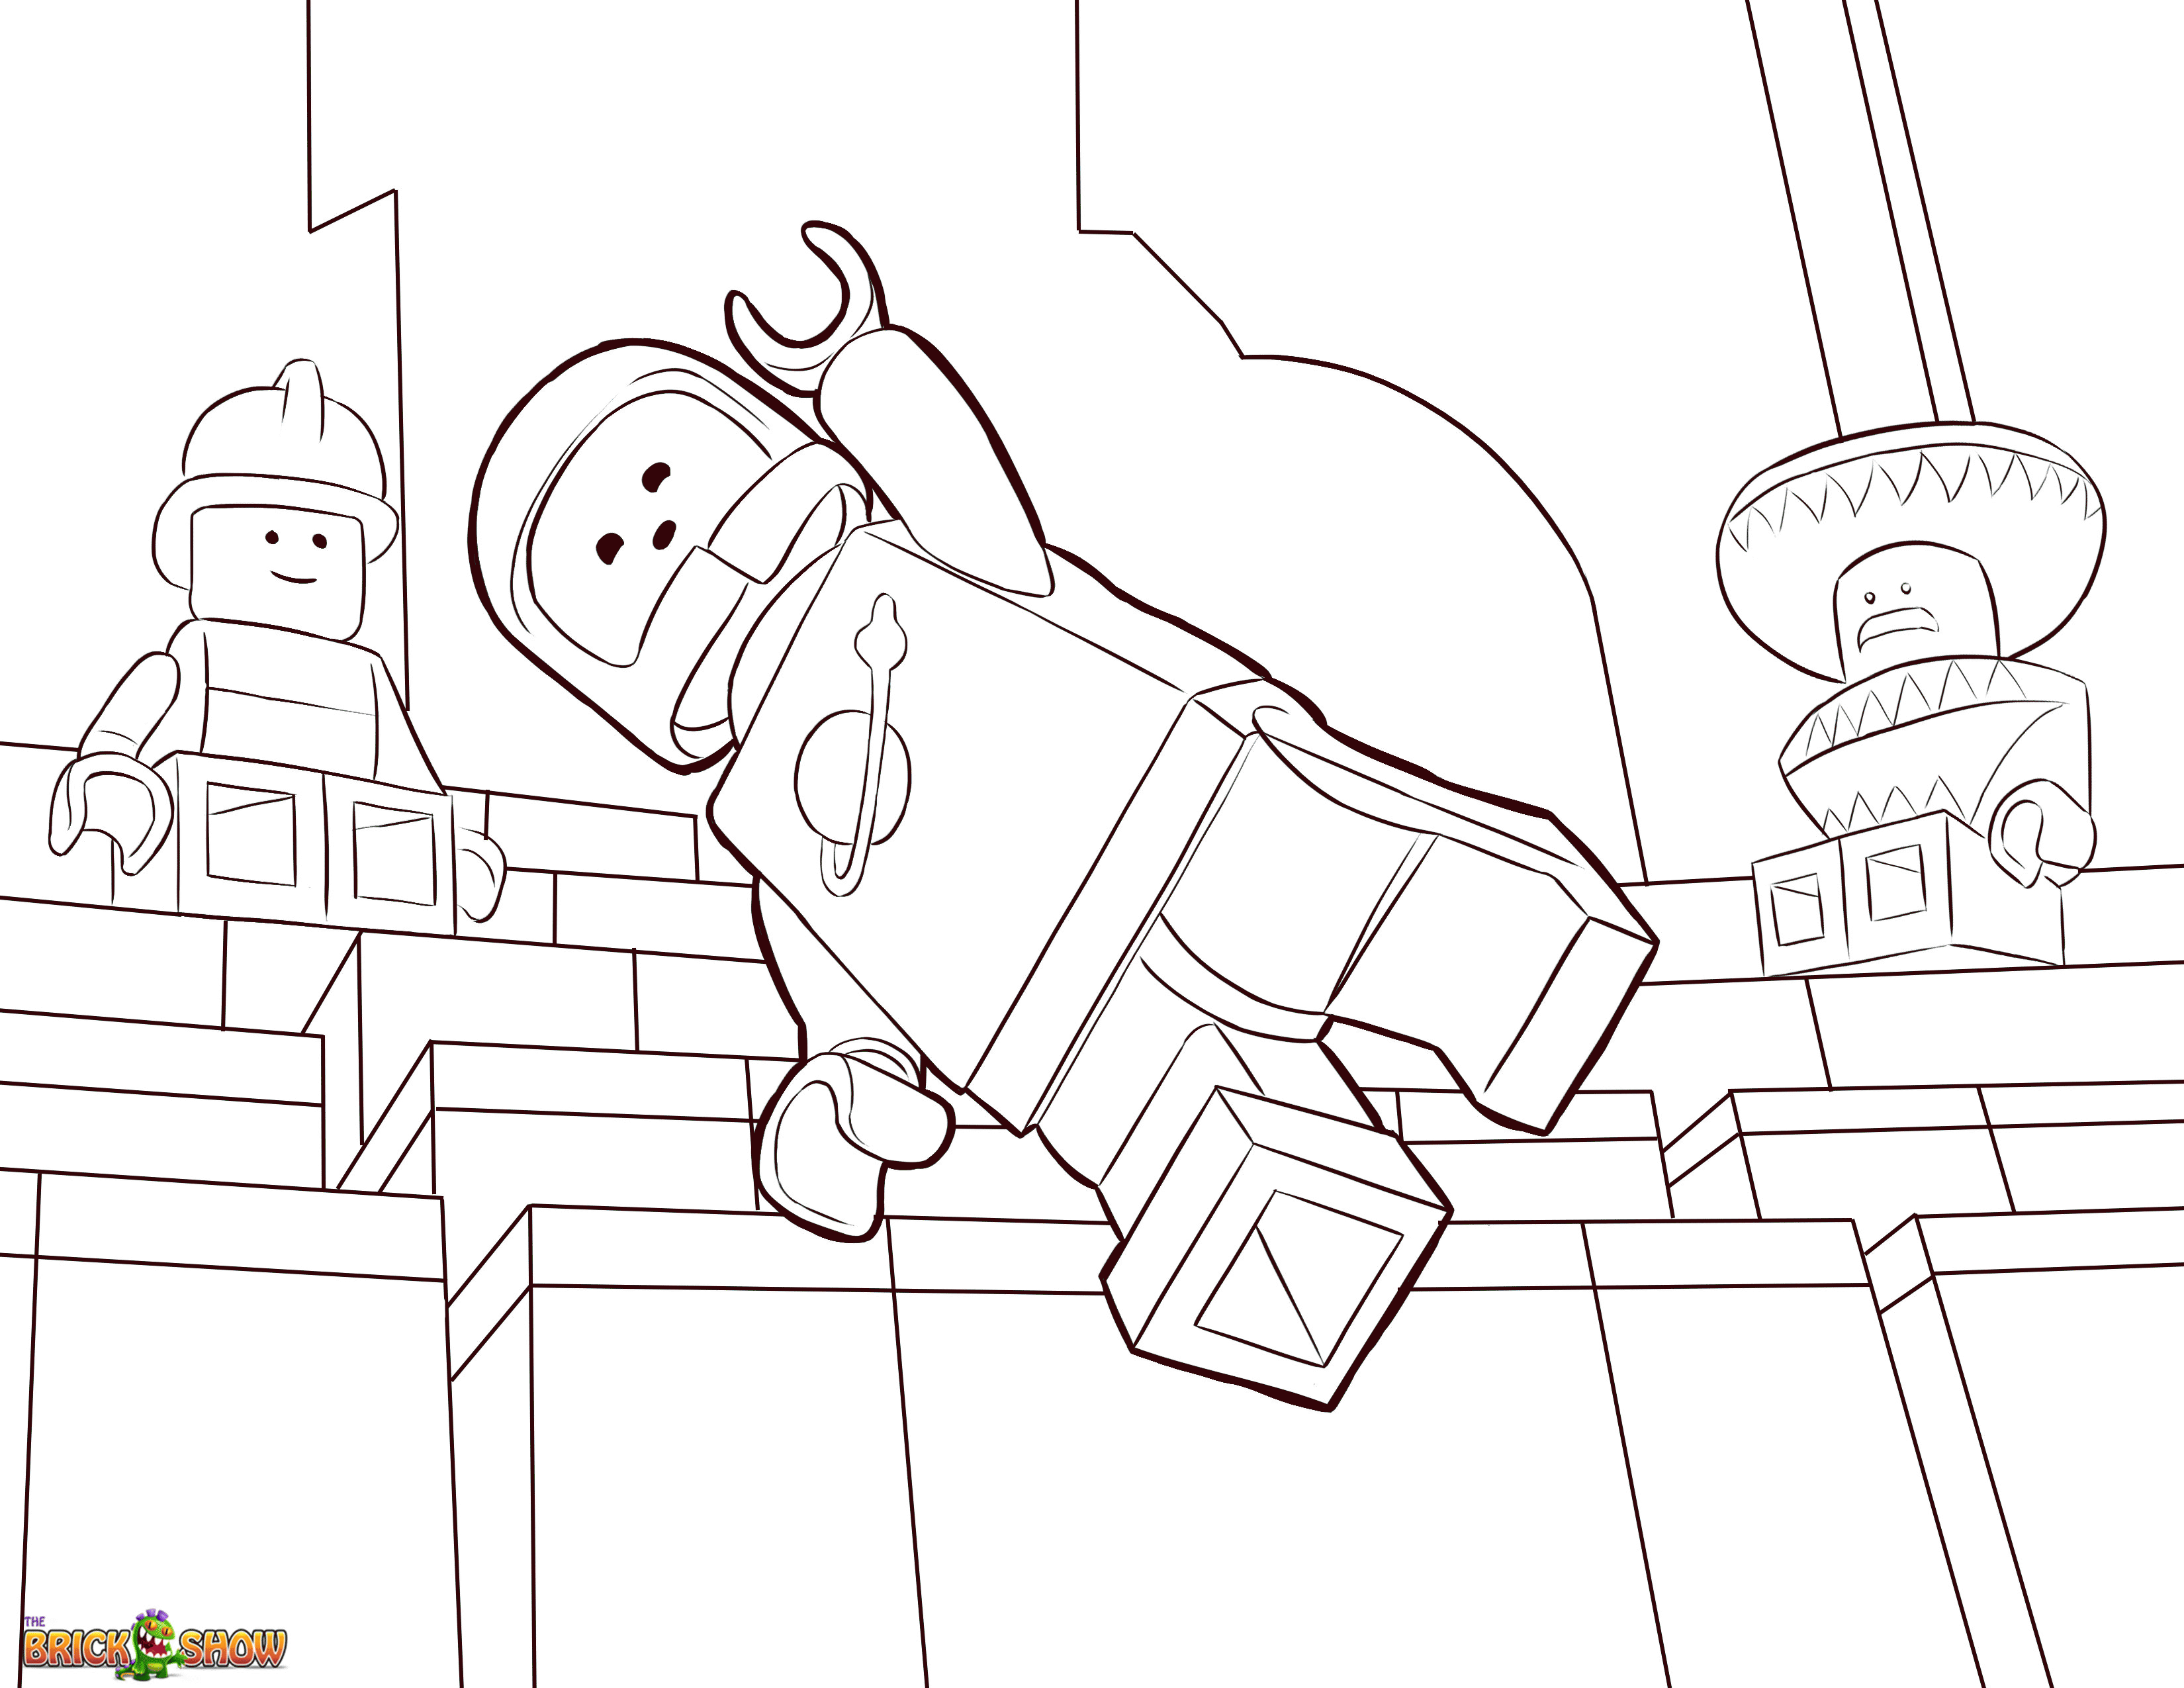 Lego Movie Coloring Pages Printable - Coloring